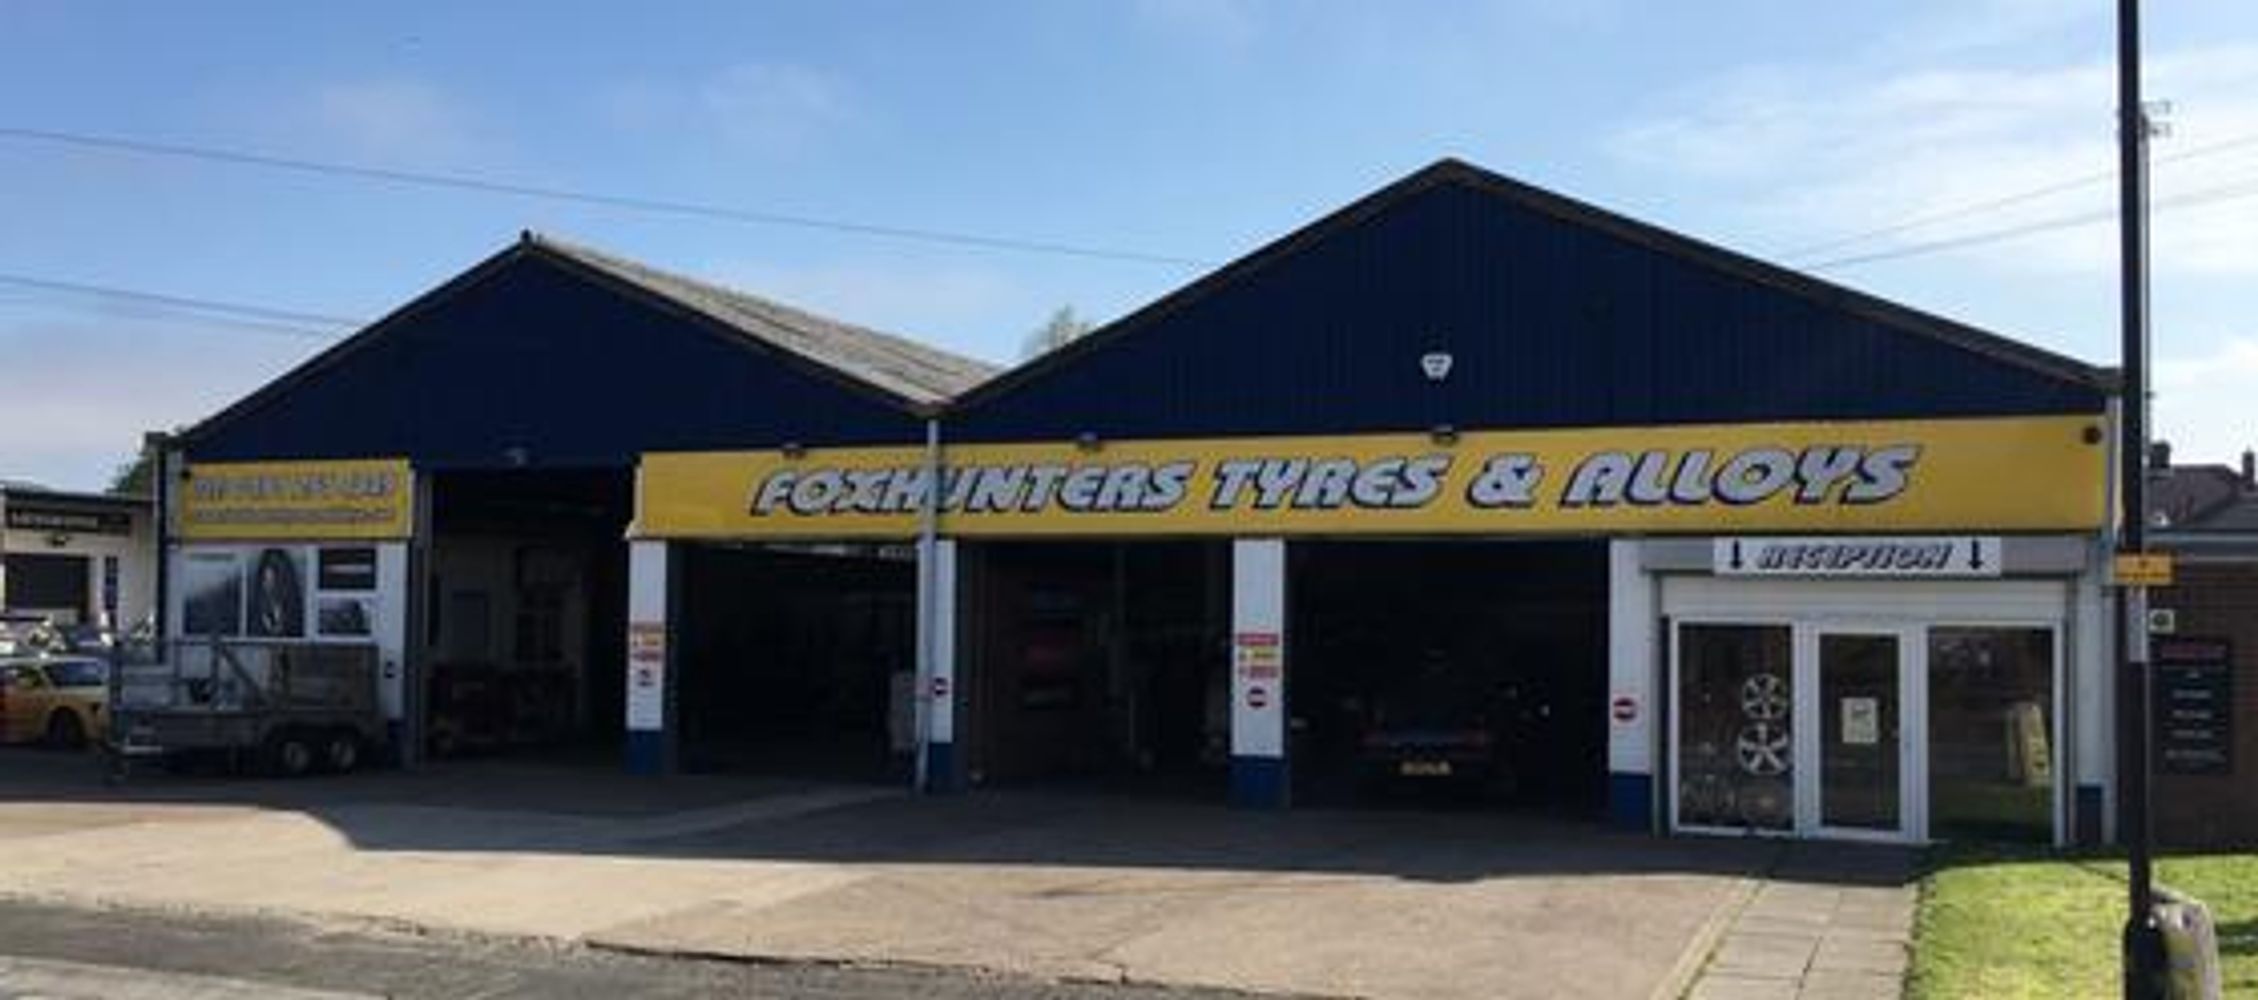 Foxhunters Tyres and Alloy Wheels Whitley Bay